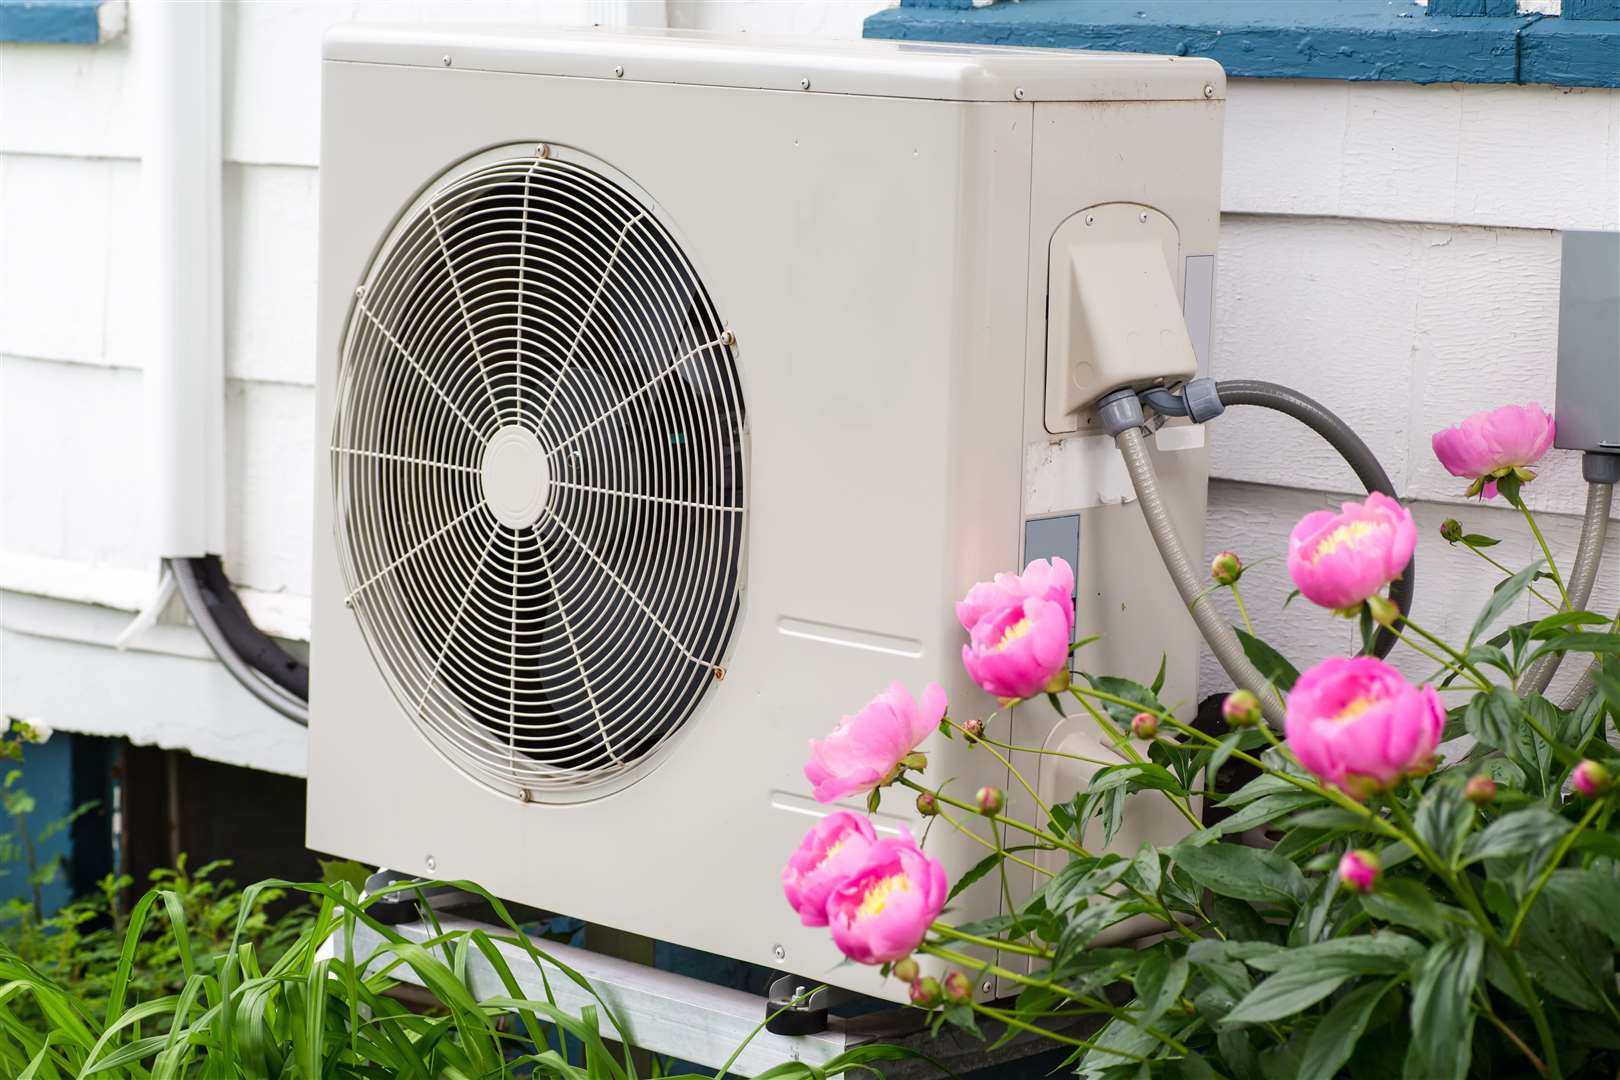 Air conditioning/ Heat pump unit on the side of a home among the flowers..